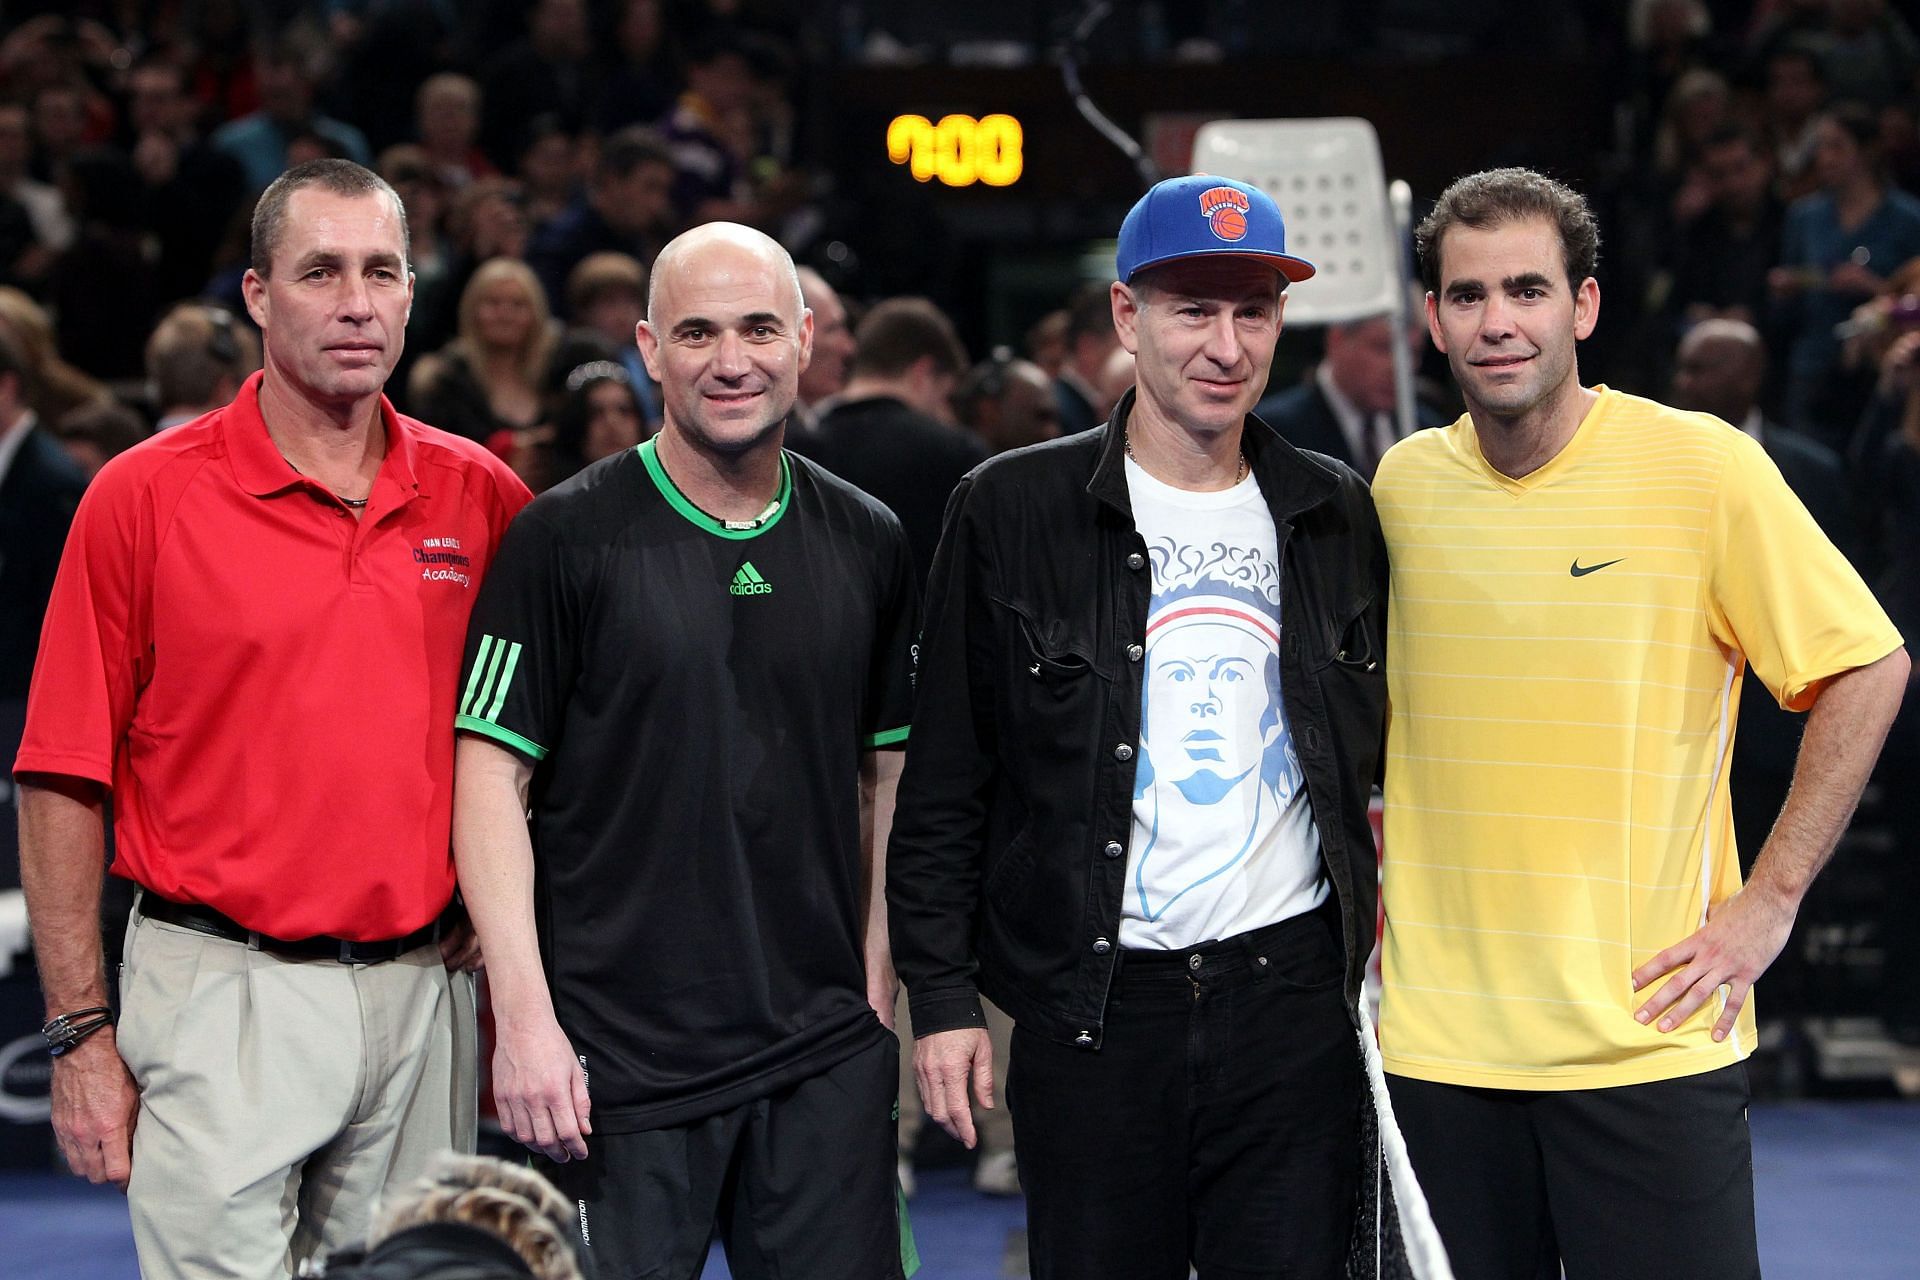 Andre Agassi and John McEnroe with Pete Sampras (first from right) and Ivan Lendl (first from left)